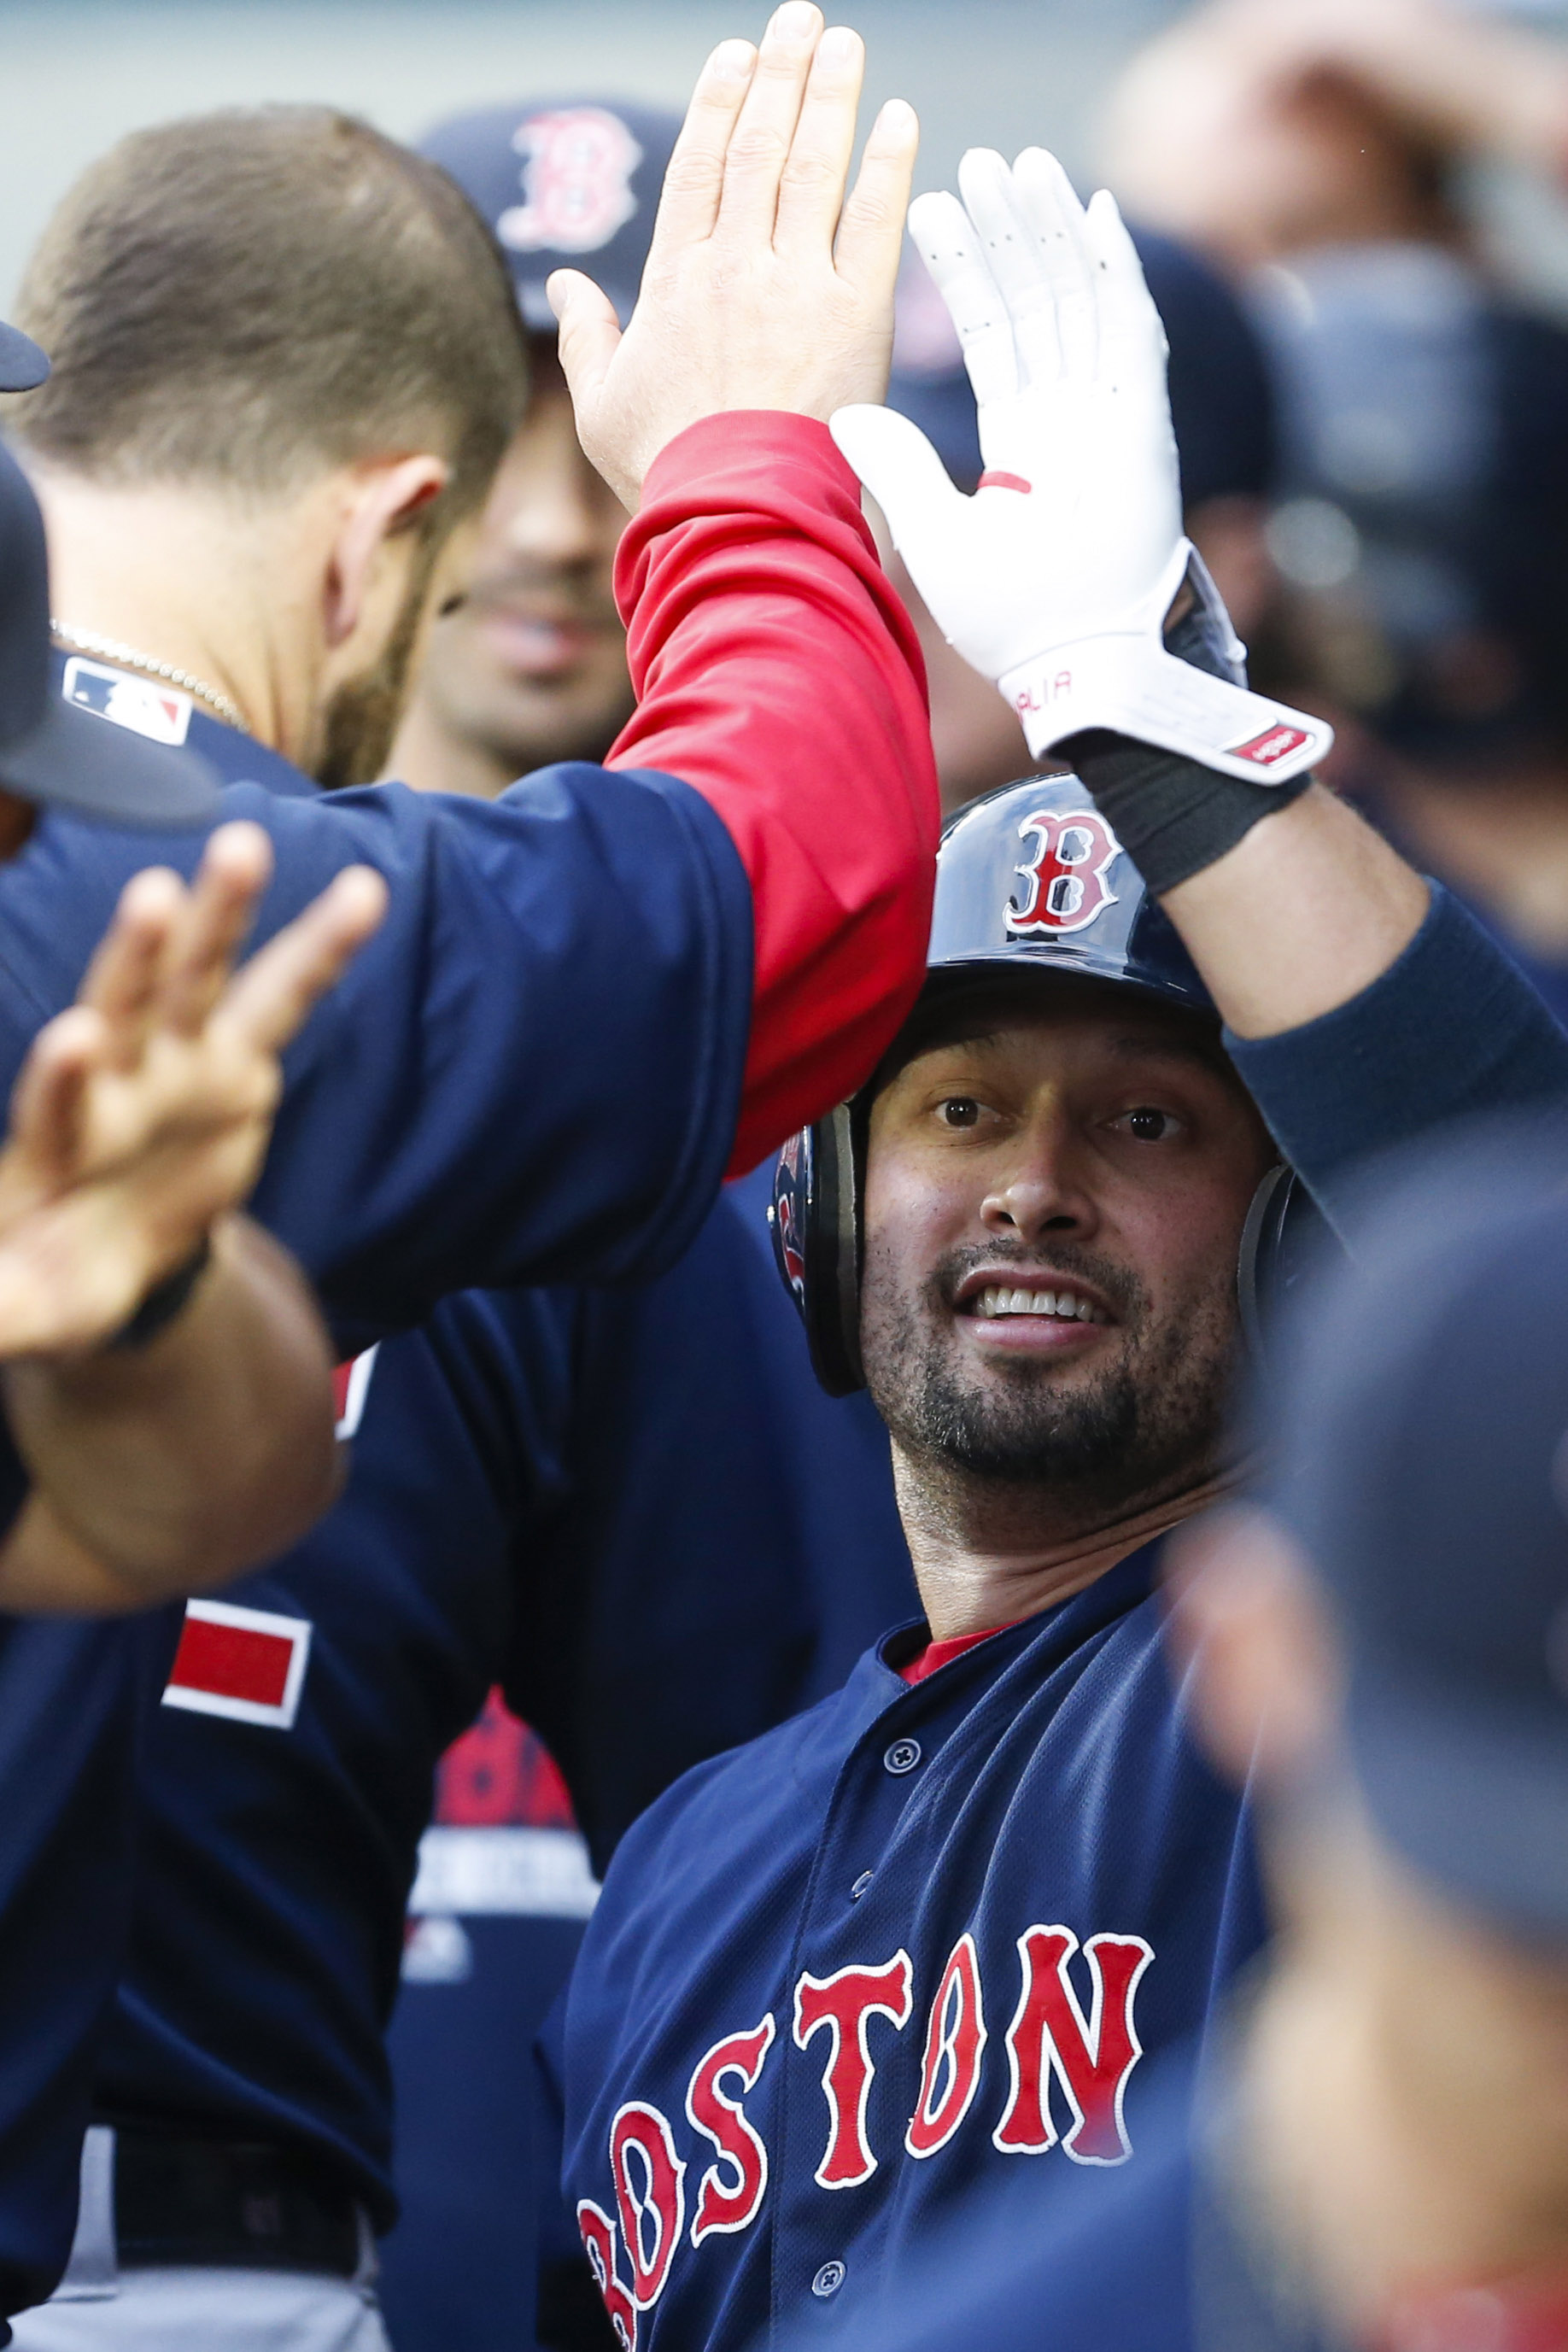 SHANE VICTORINO has the SCAM OF A LIFETIME in his debut!